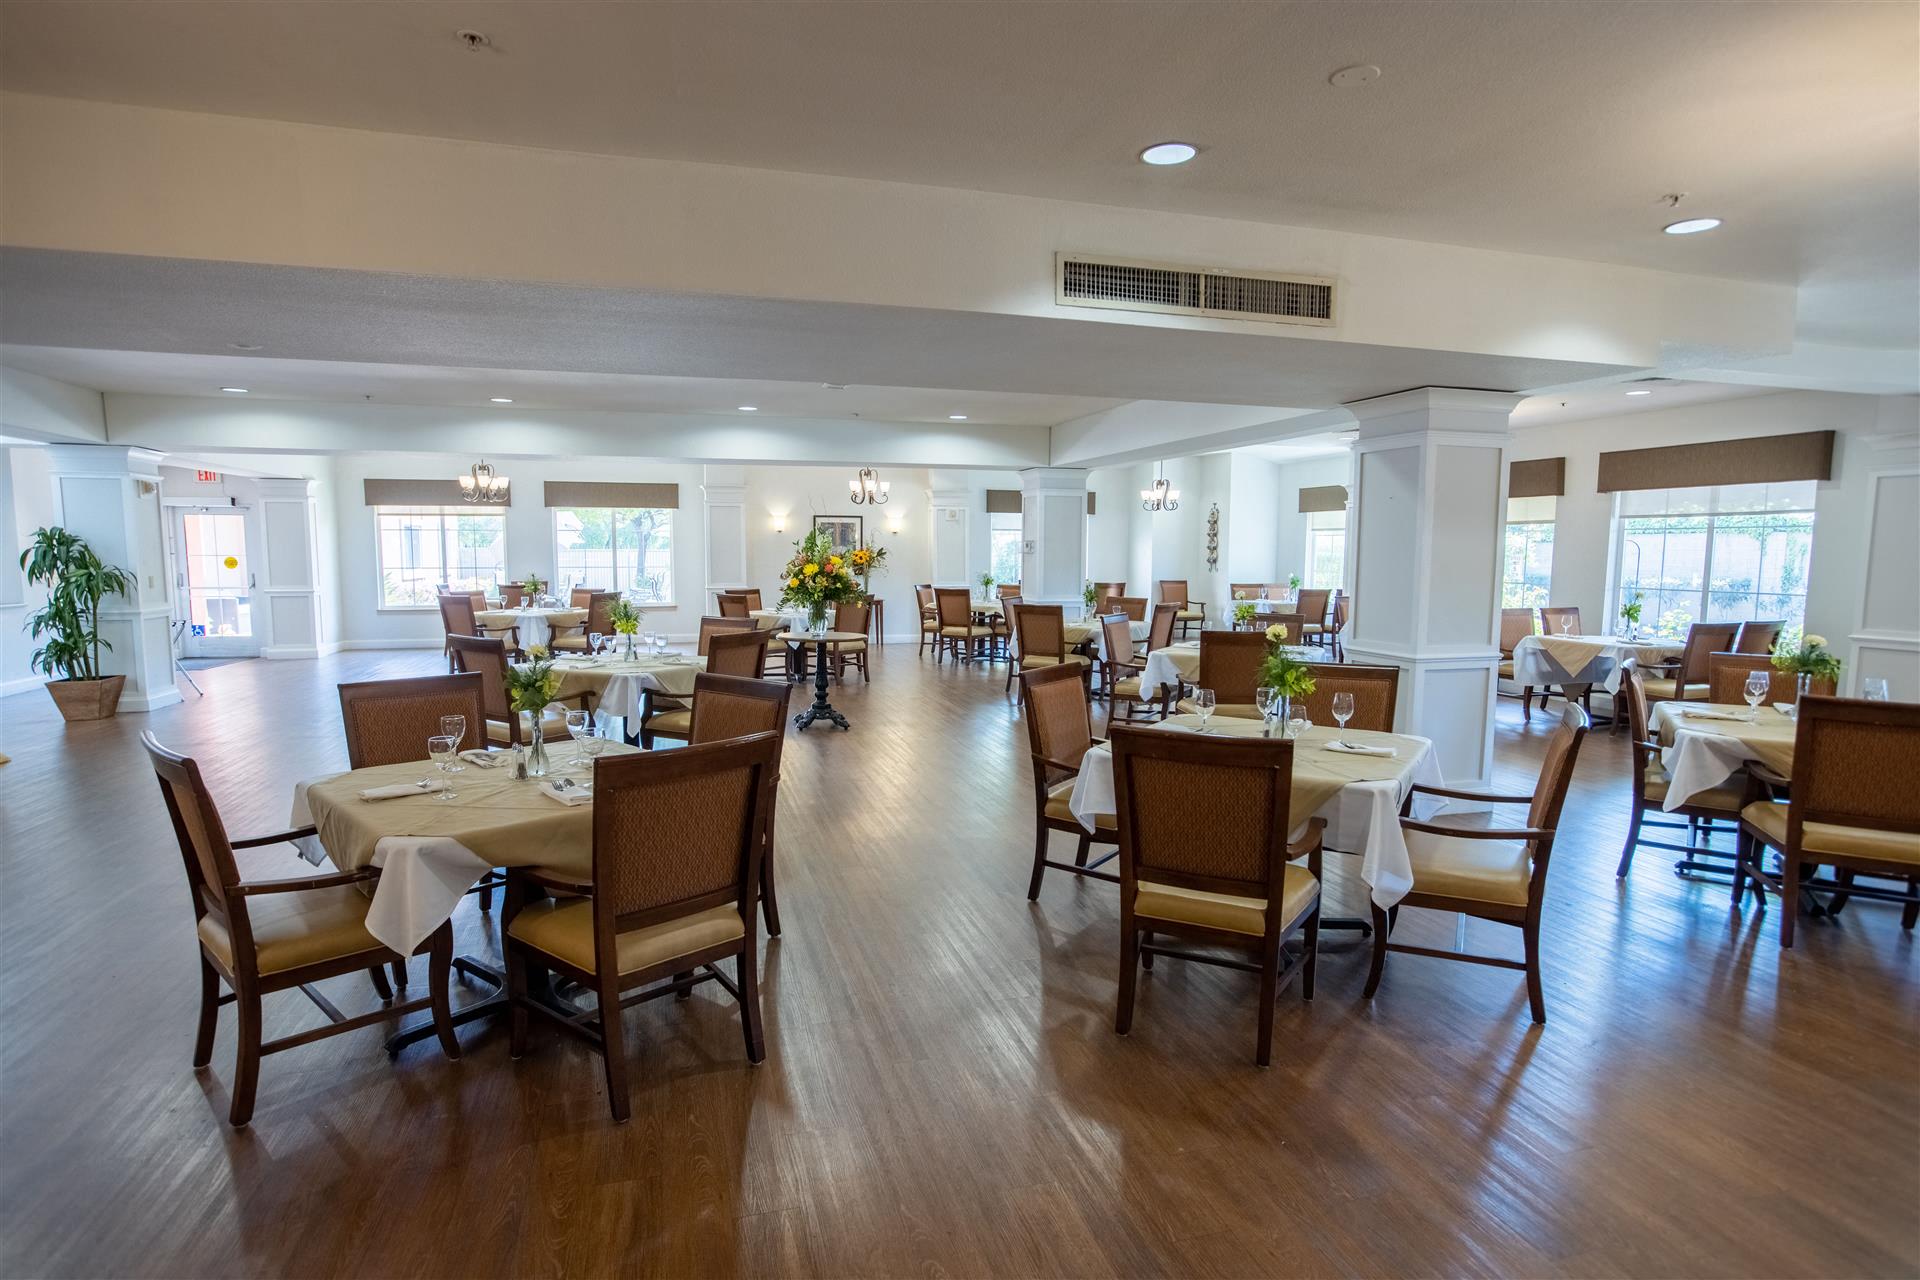 Dining hall at Cogir of Stock Ranch, Citrus Heights, CA, 95621